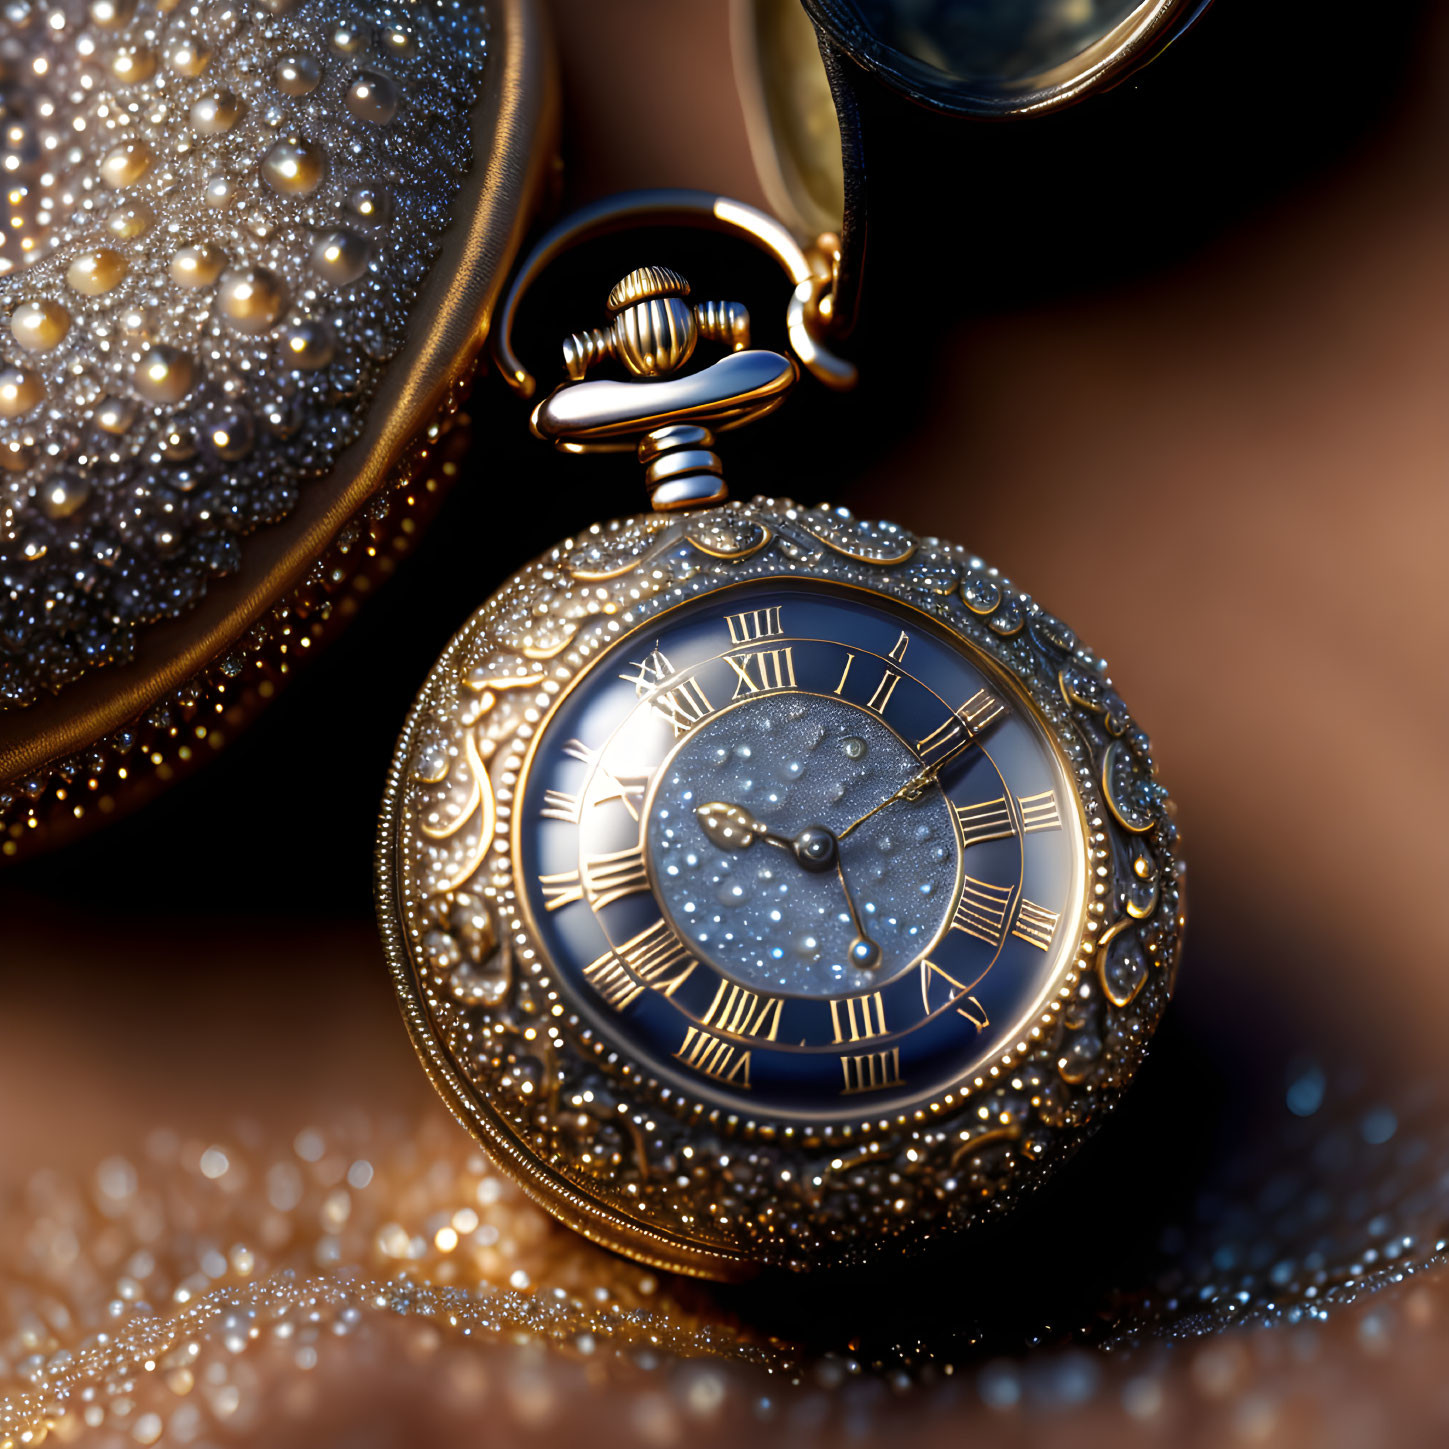 Golden Pocket Watch with Roman Numerals and Stardust Design